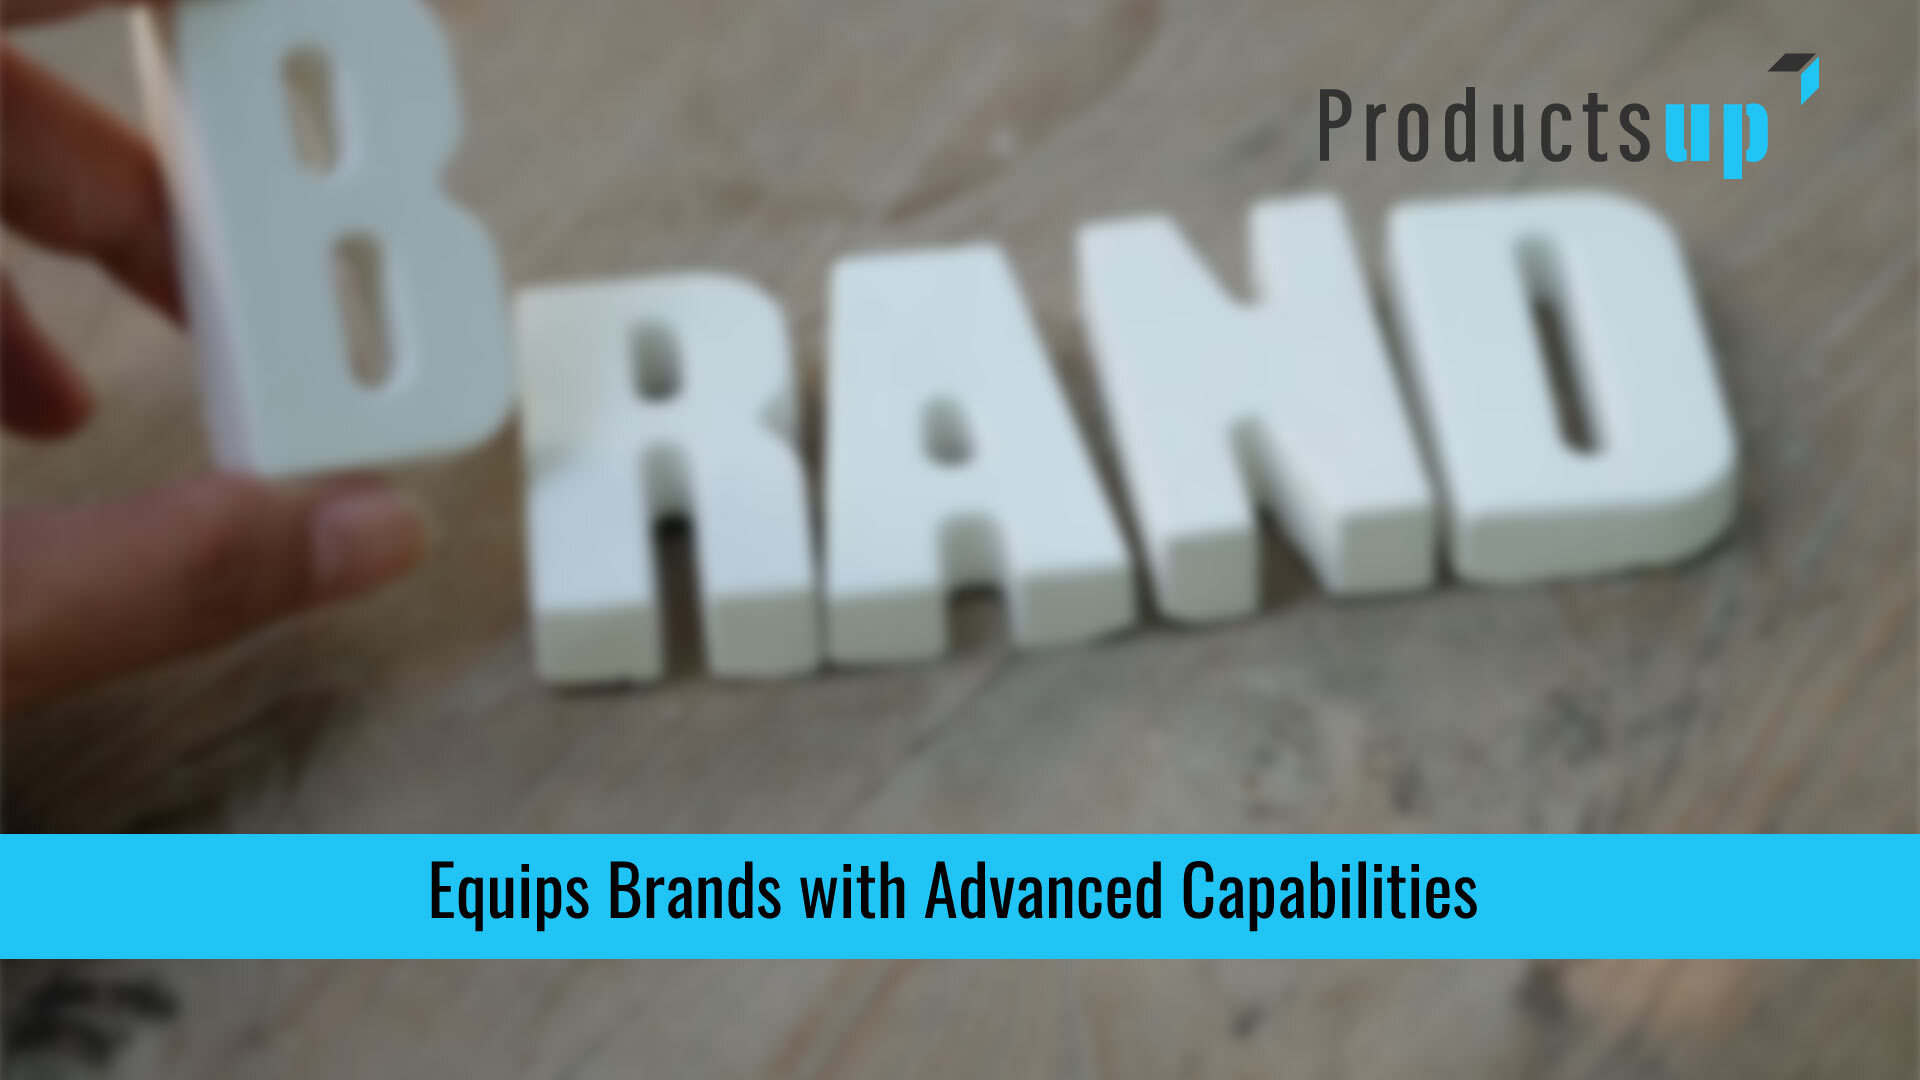 Productsup equips brands with advanced capabilities for driving global growth on Amazon